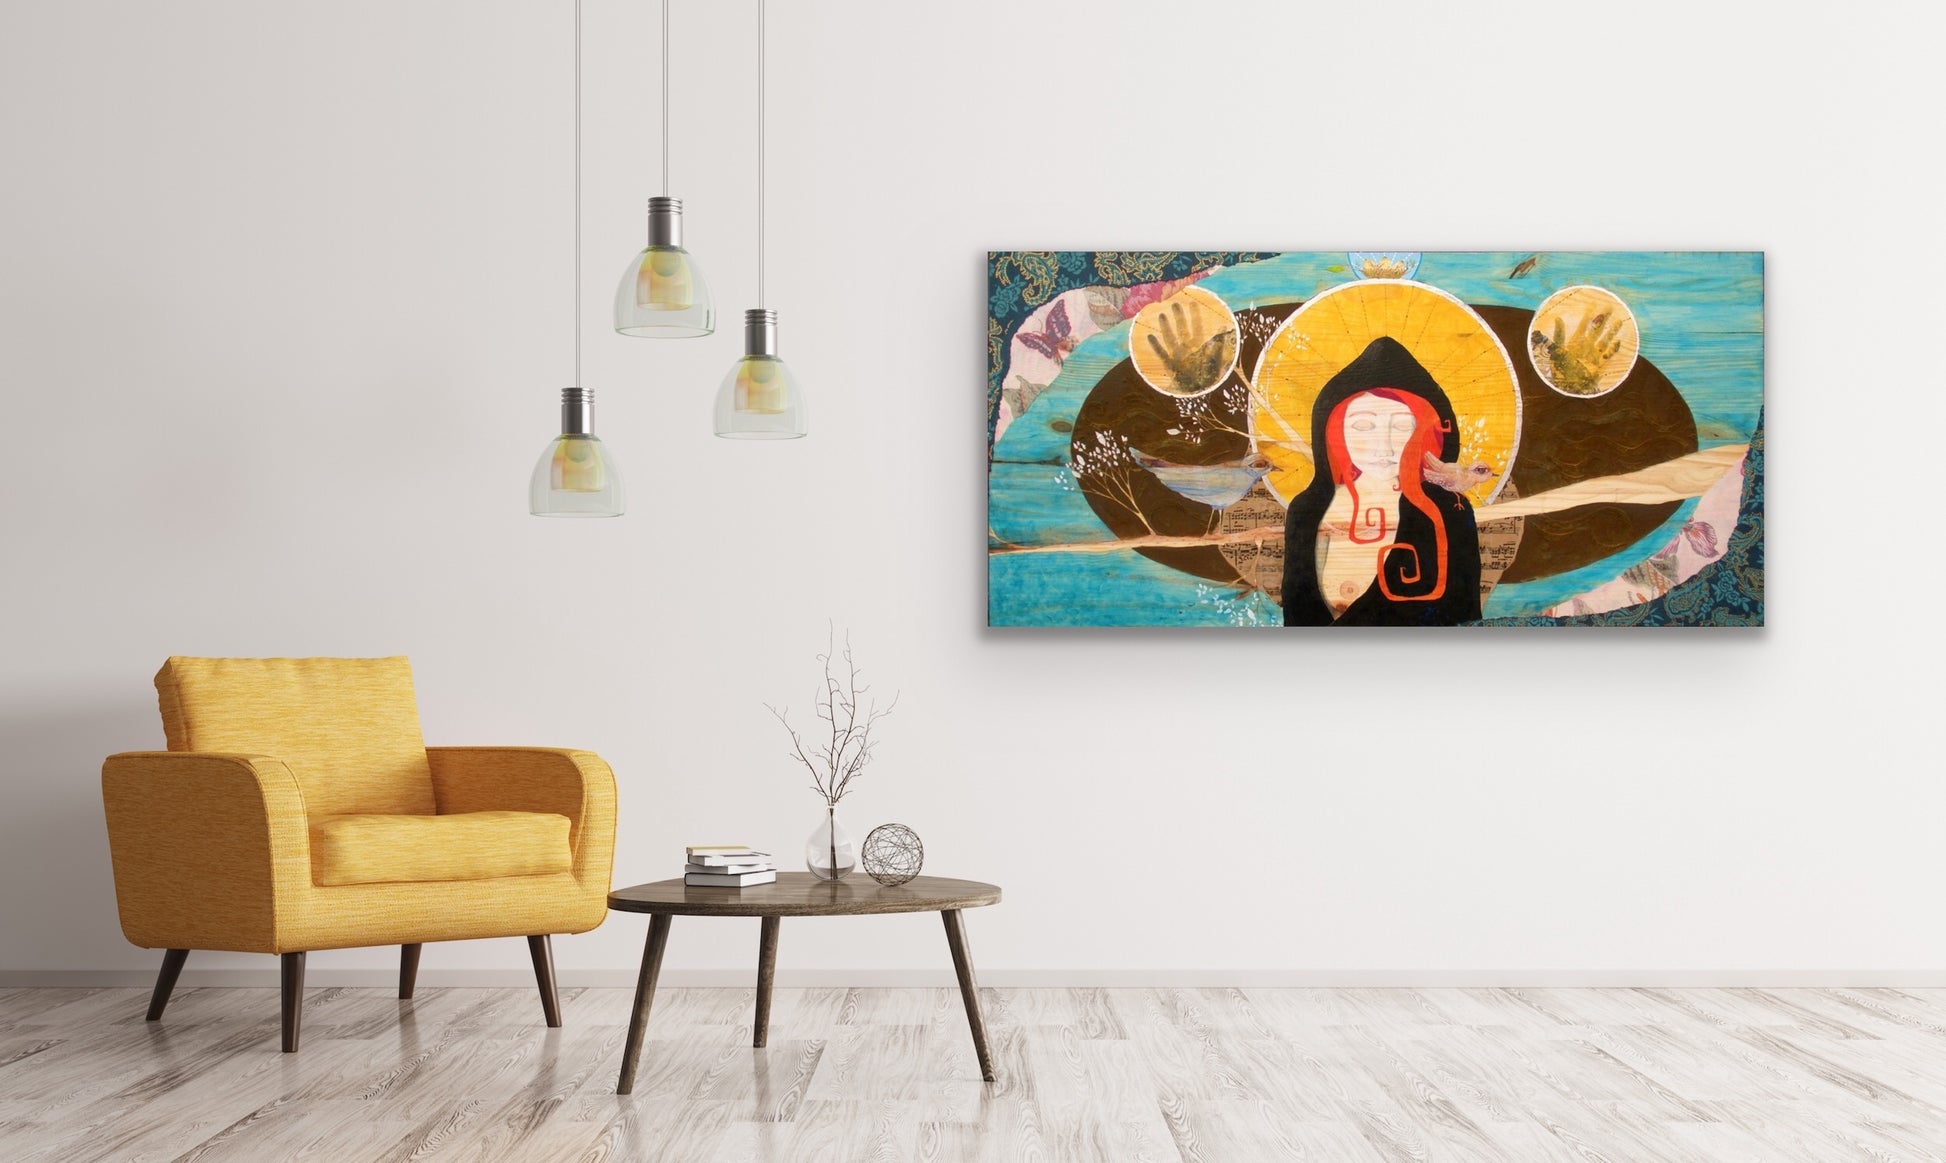 feminine artwork hanging on a wall in a room with a yellow chair, lamps, and a wooden table